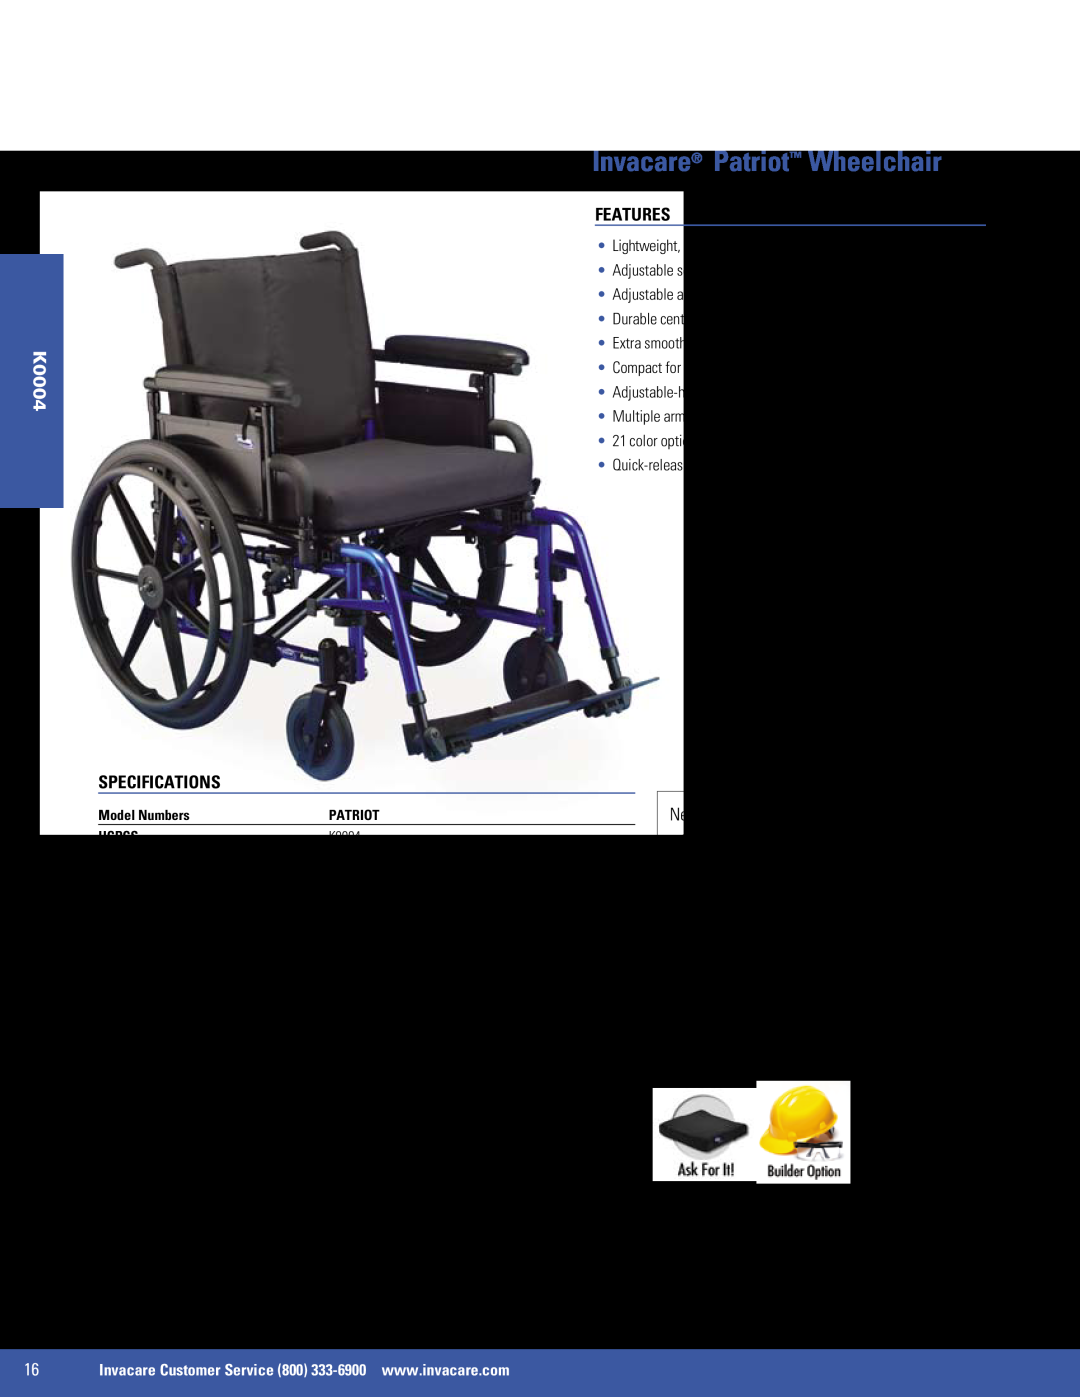 Invacare 9000 XT, 9000 SL, SX5 Invacare Patriot Wheelchair, K0004, Features, Specifications, Lightweight, aluminum frame 